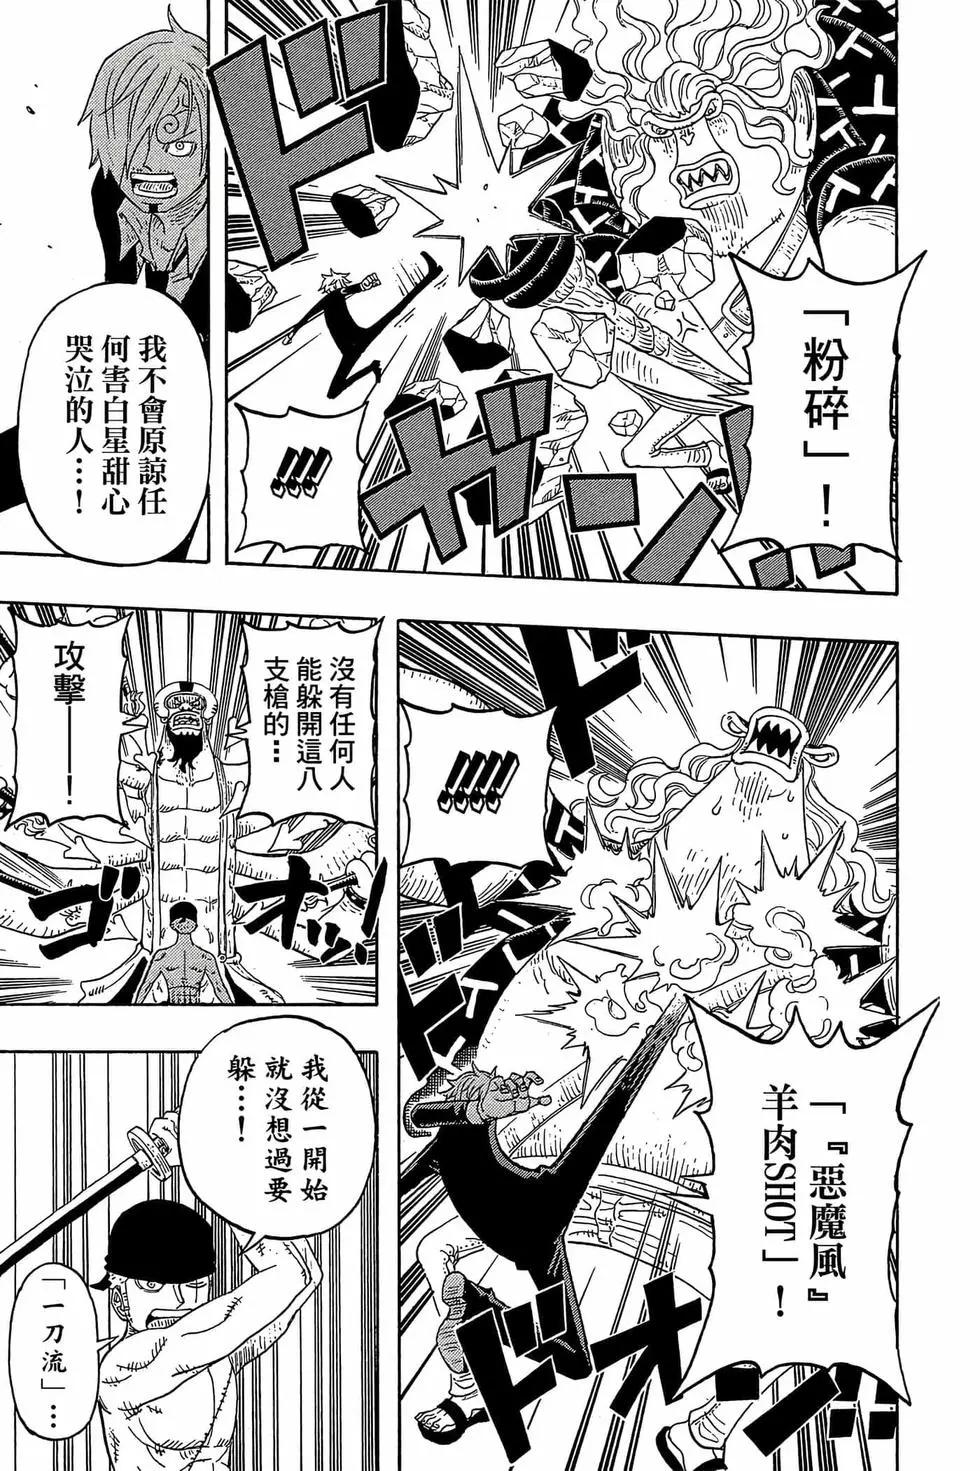 One piece party - 第03卷(2/4) - 2